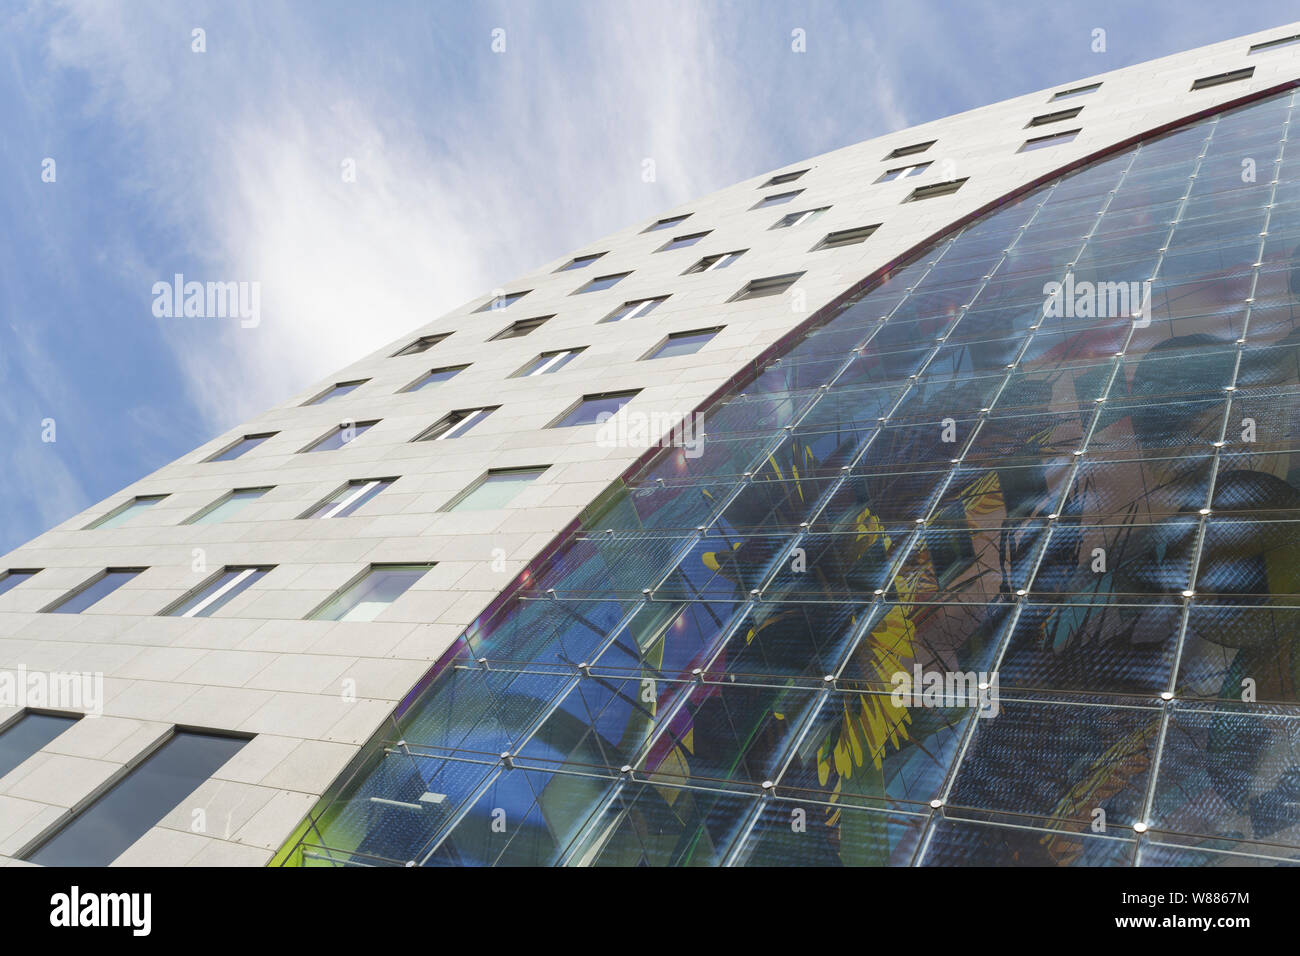 Markthal Market Hall in Rotterdam, the Netherlands. Stock Photo